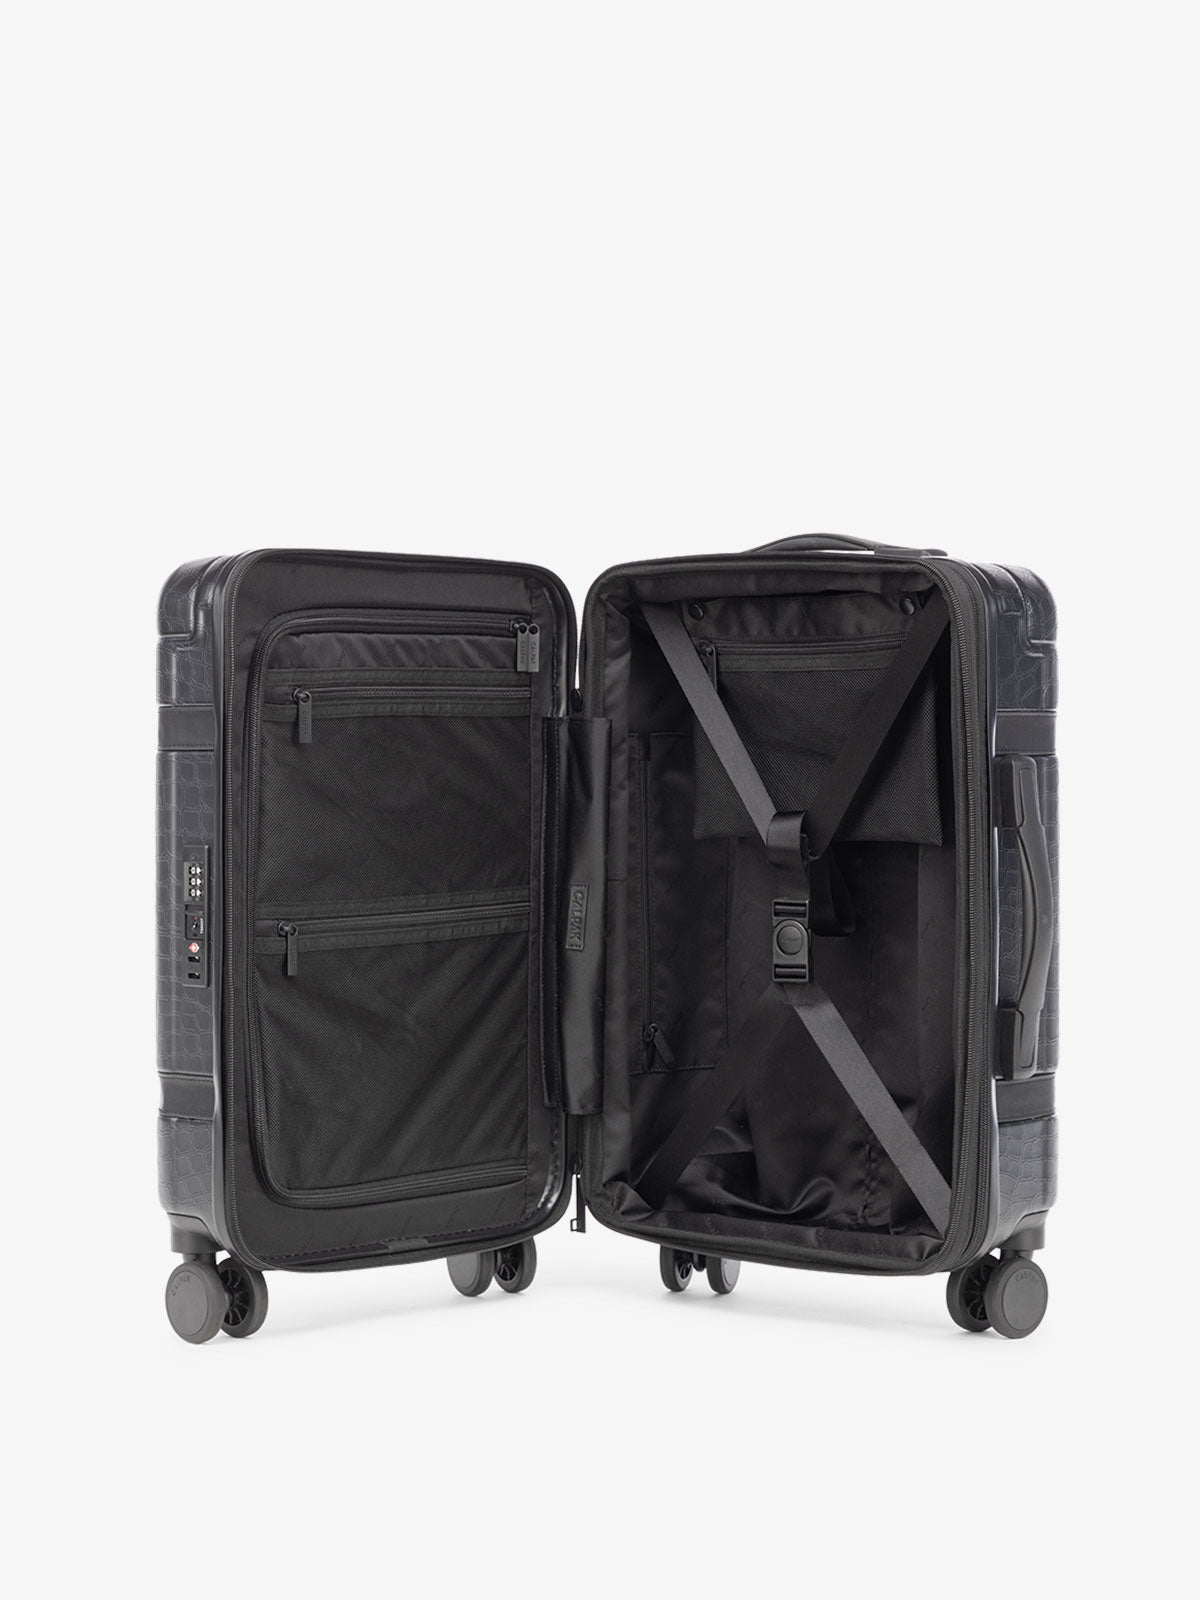 trnk carry-on suitcase with compression straps